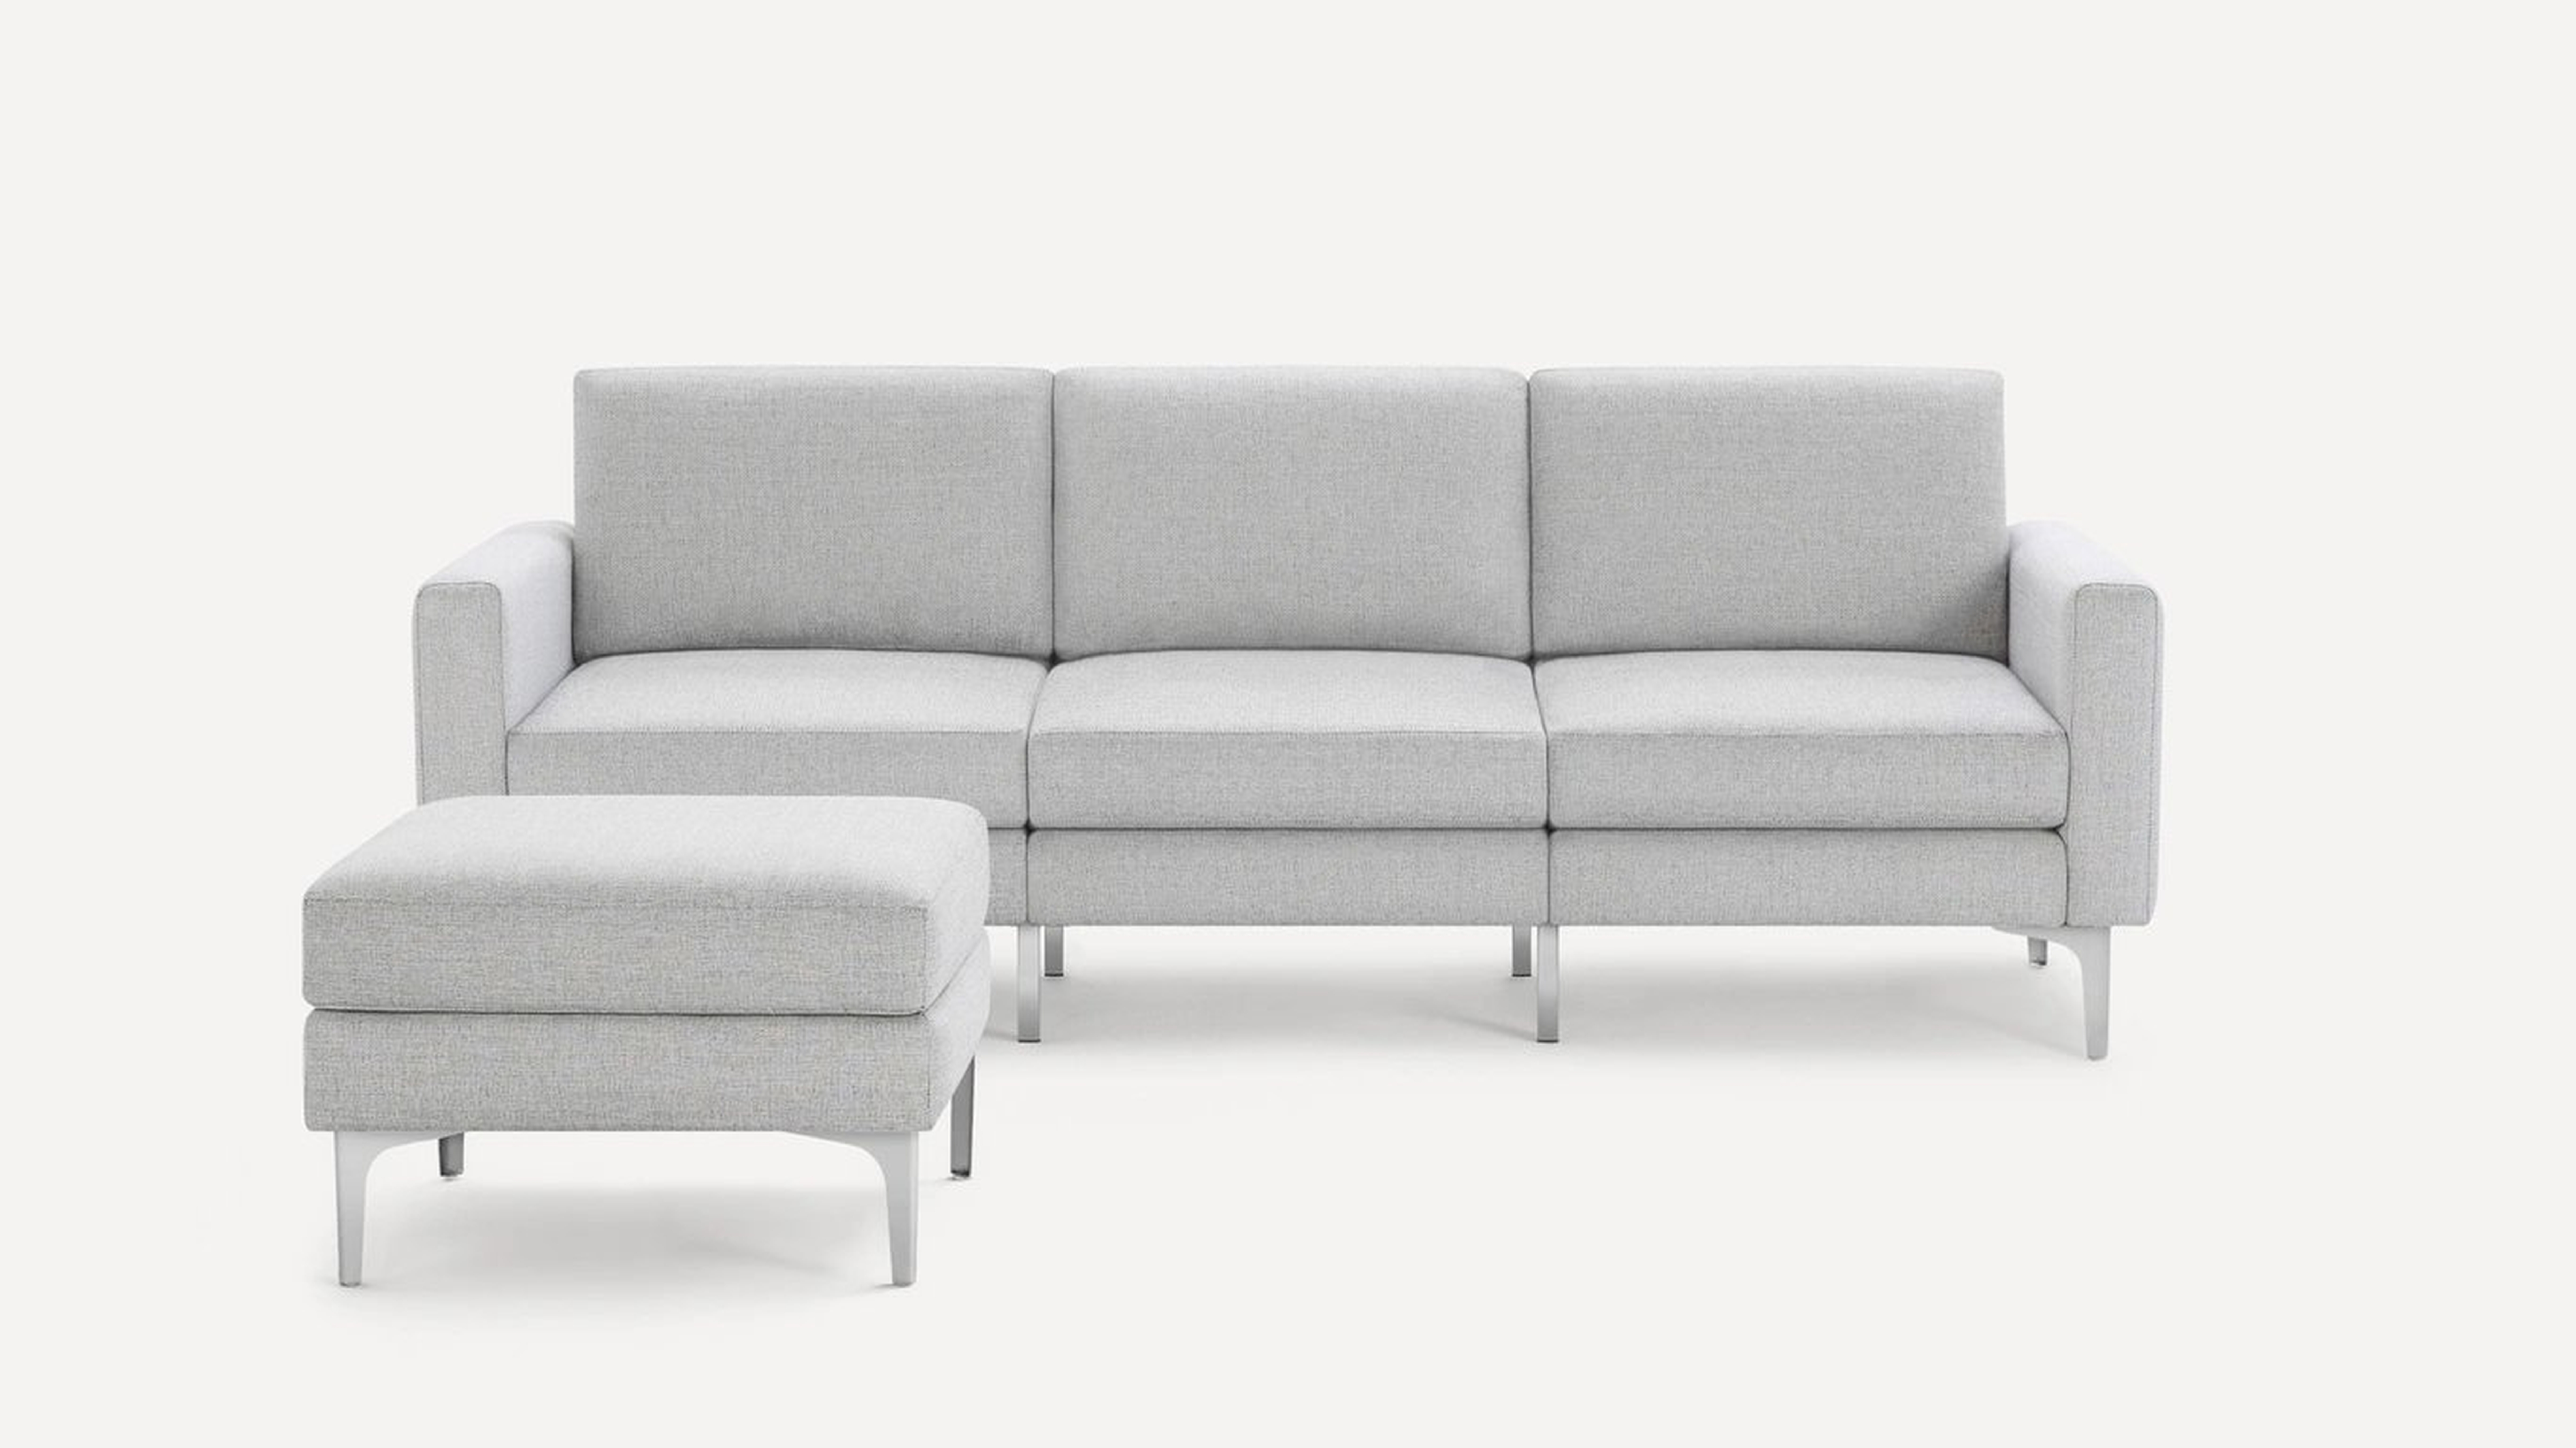 The Block Nomad Sofa with Ottoman in Crushed Gravel // Chrome leg // Block Arm // Flip Back Cushions - Burrow